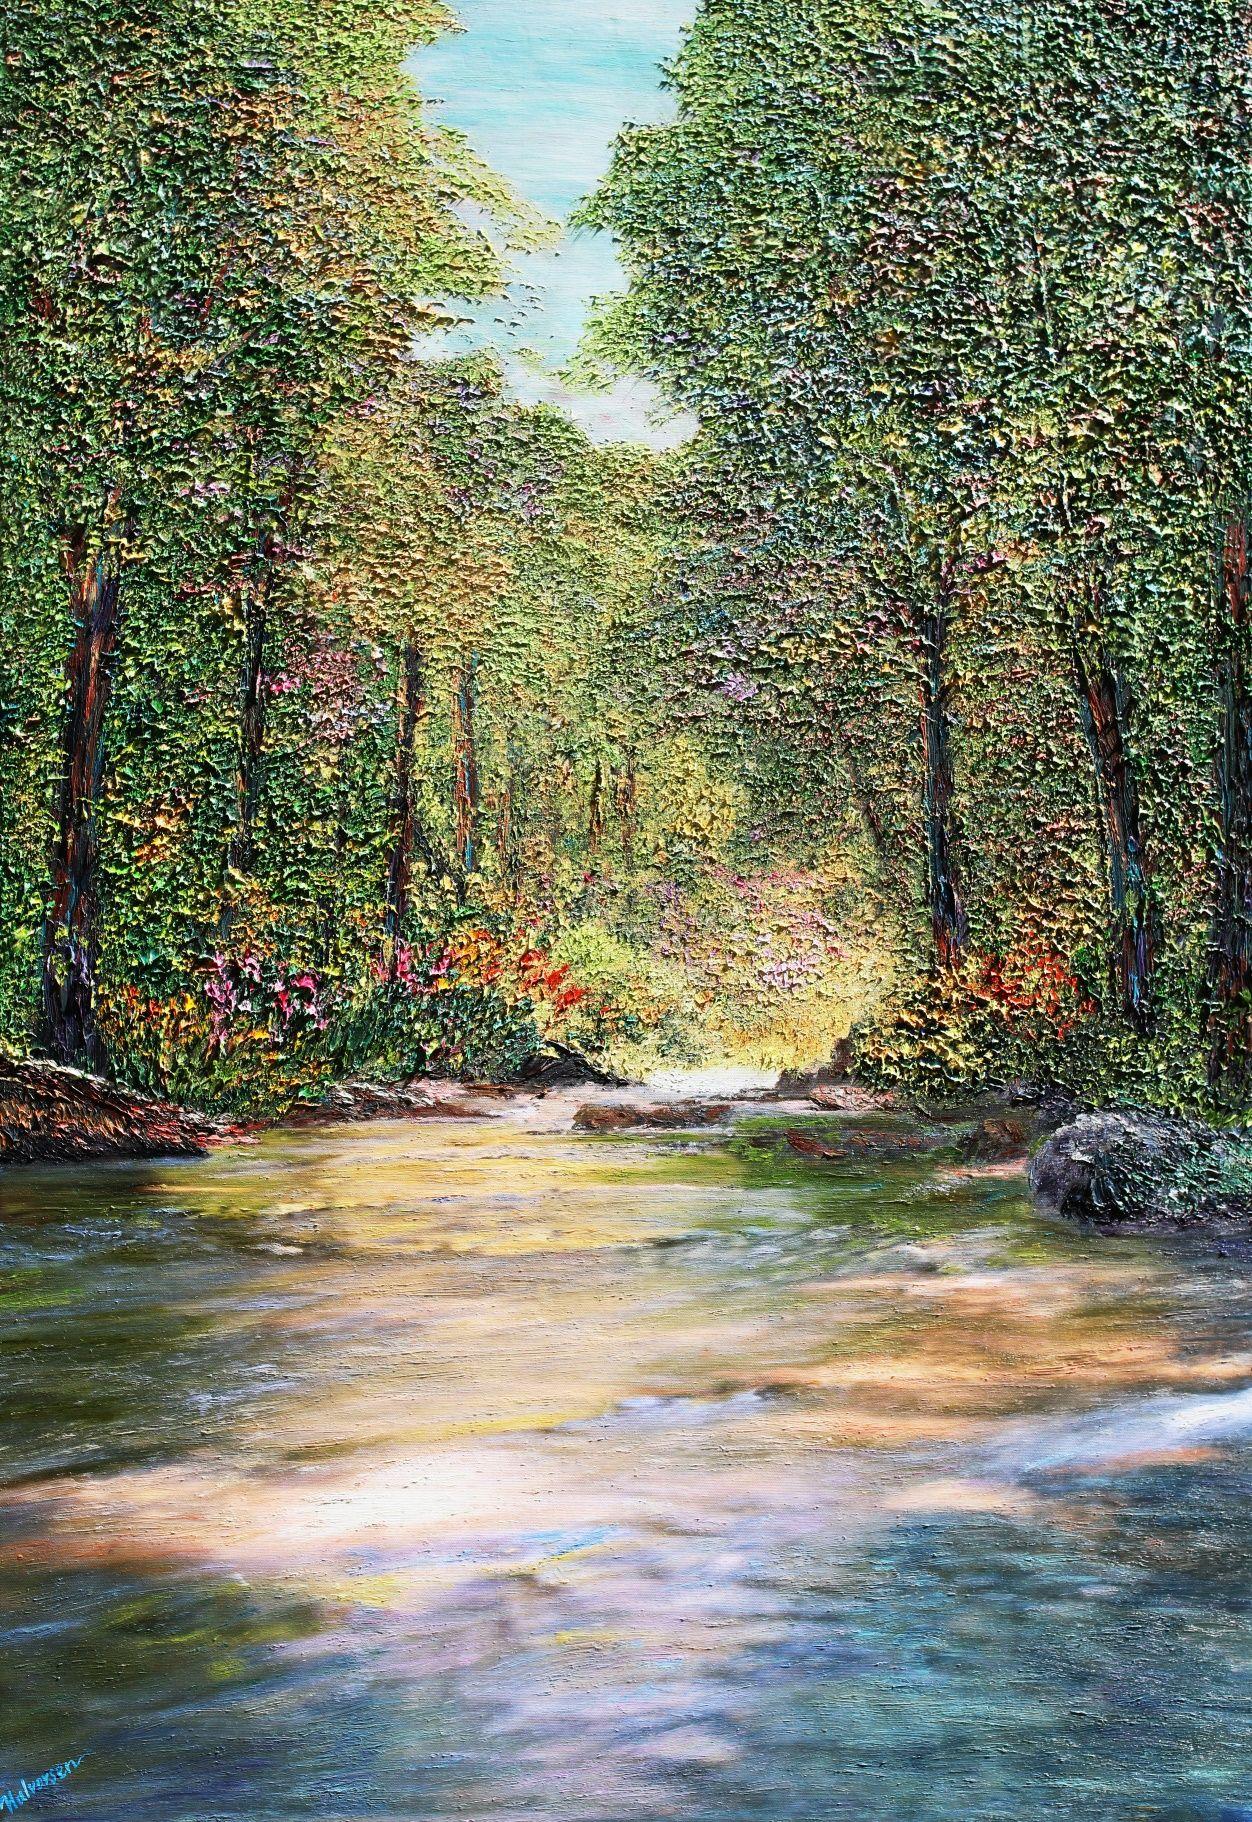 : â€œOne of my favorite scenes, this painting will always evoke memories of the peculiarity of nature's beauty.â€  Oil on canvas study of a stream becoming a river surrounded by a floral outburst of natural opalescence.    The painting is executed